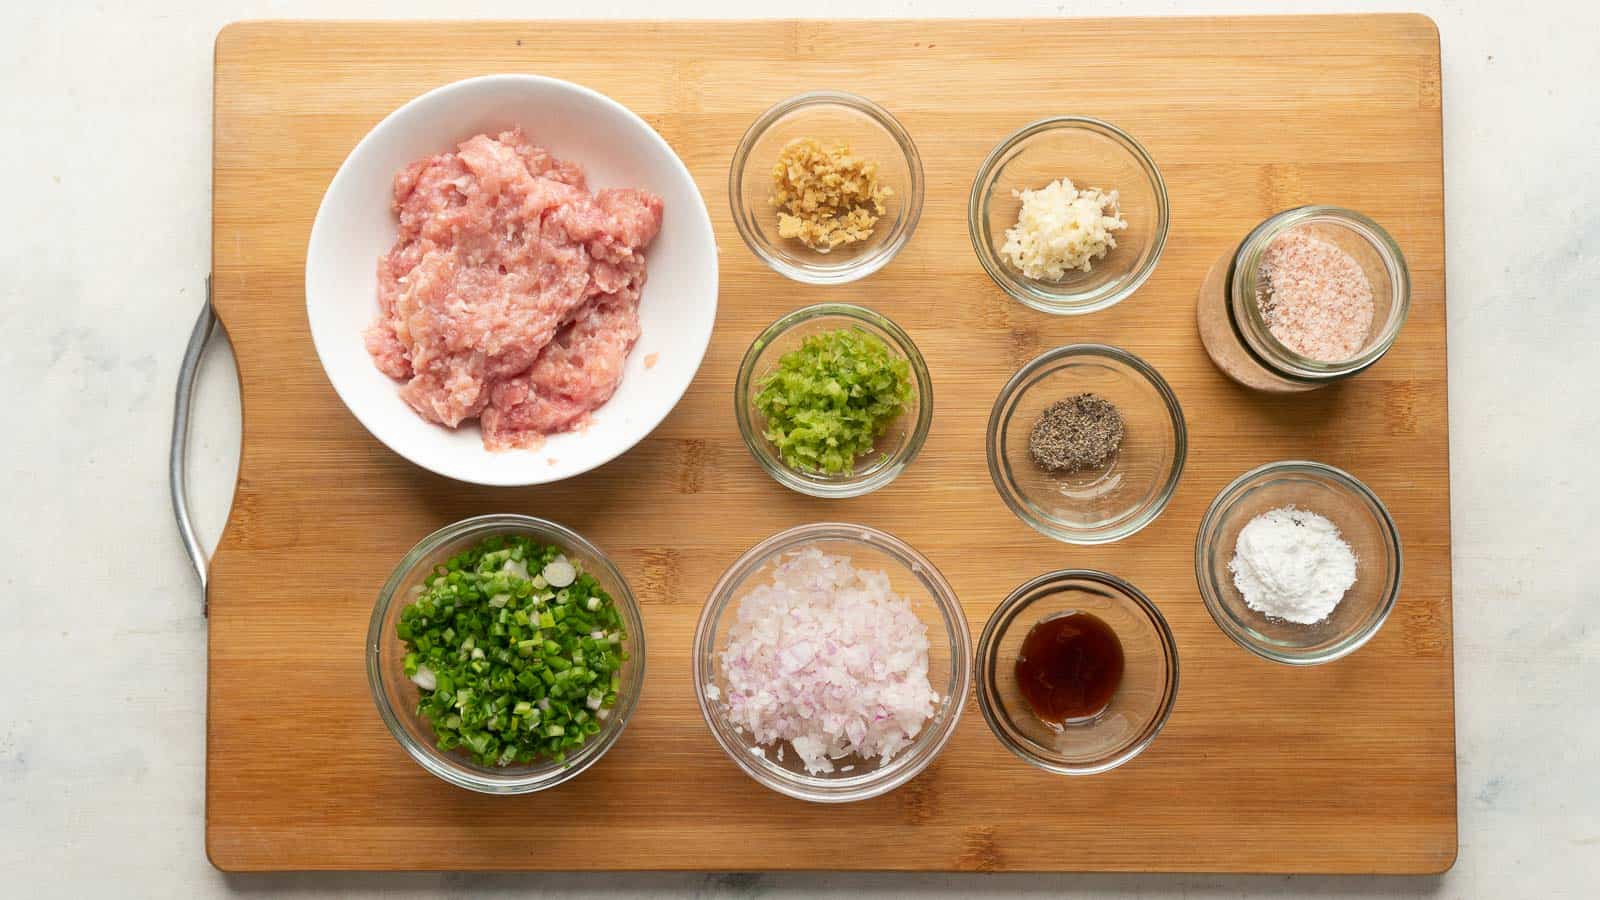 Ingredients for the chicken momos filling